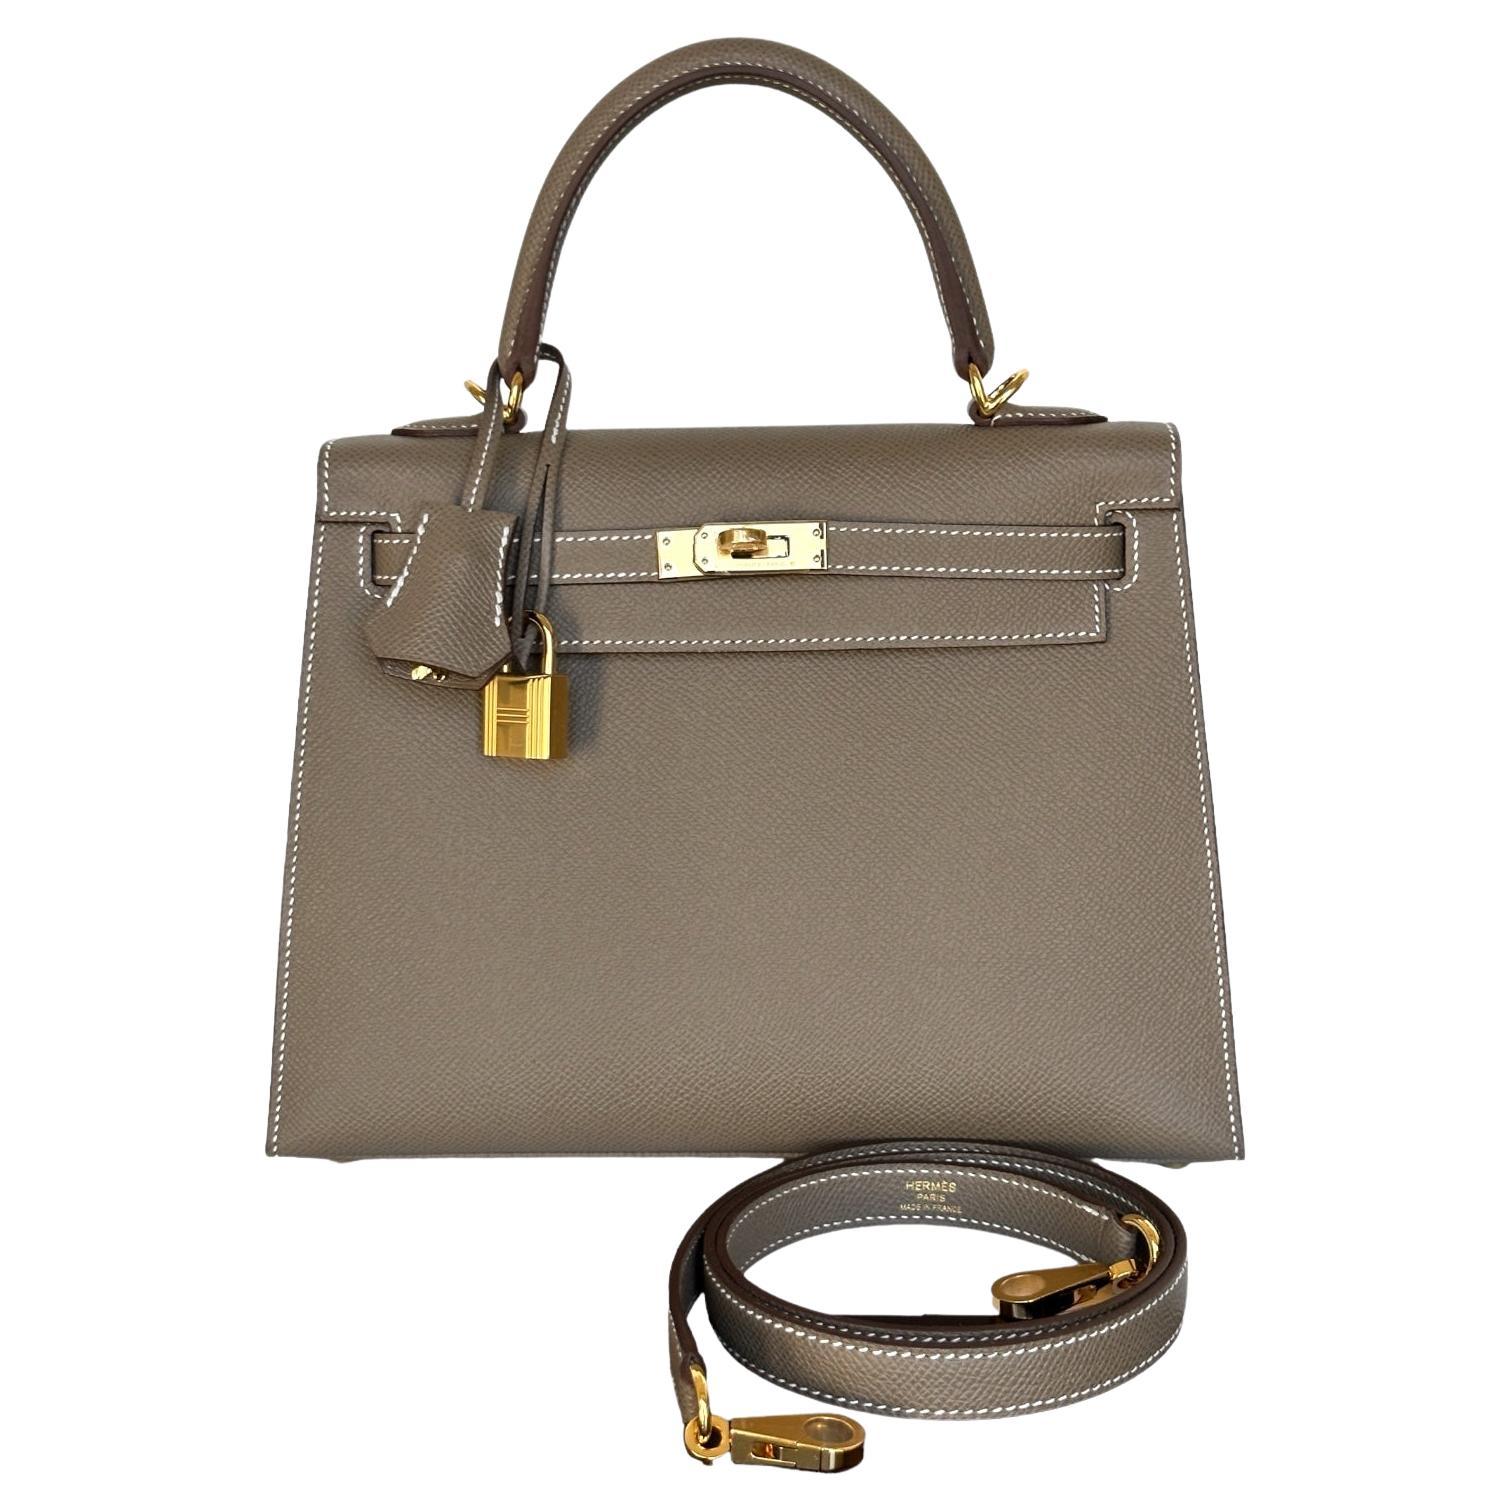 Hermes 25cm Kelly
Hermes Kelly 25cm
2022 U stamp
Etoupe one of the most coveted colors, such a great neutral for everyday
The interior is lined with Etoupe chevre leather and has one zip pocket with an Hermes engraved pull and one open pocket on the